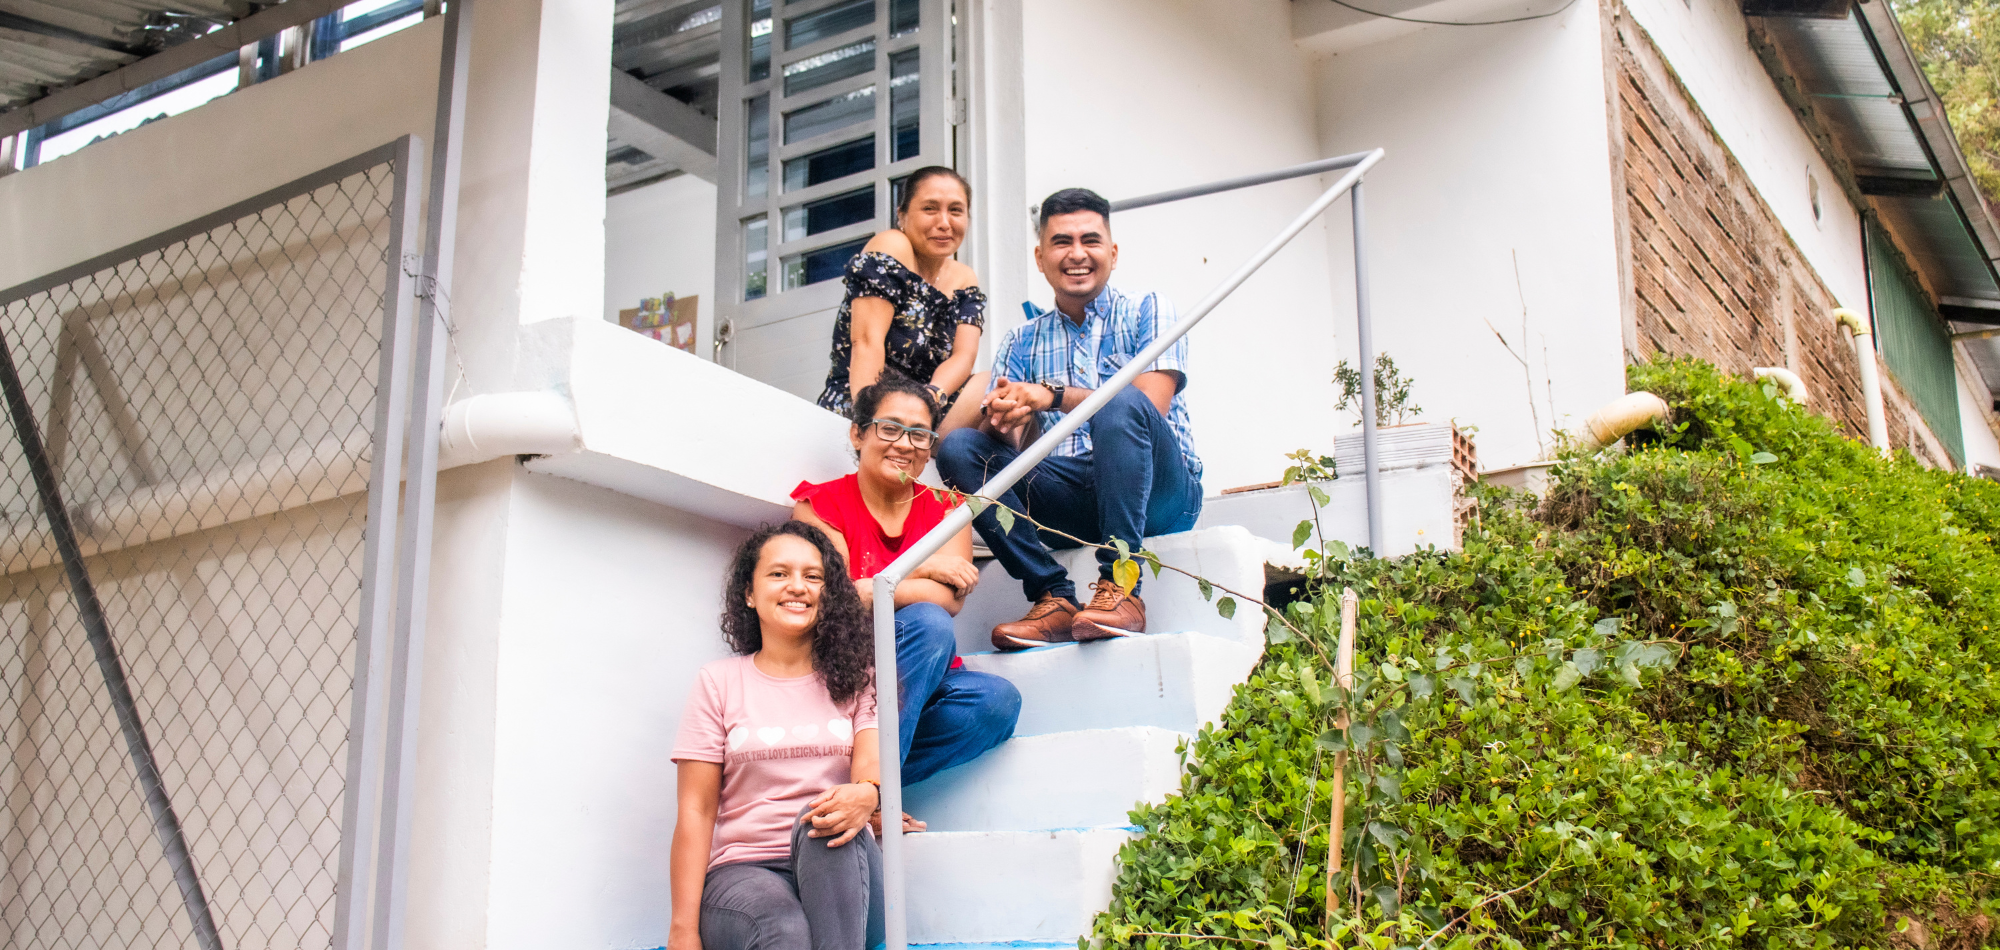 Four people sitting on stairs and smiling